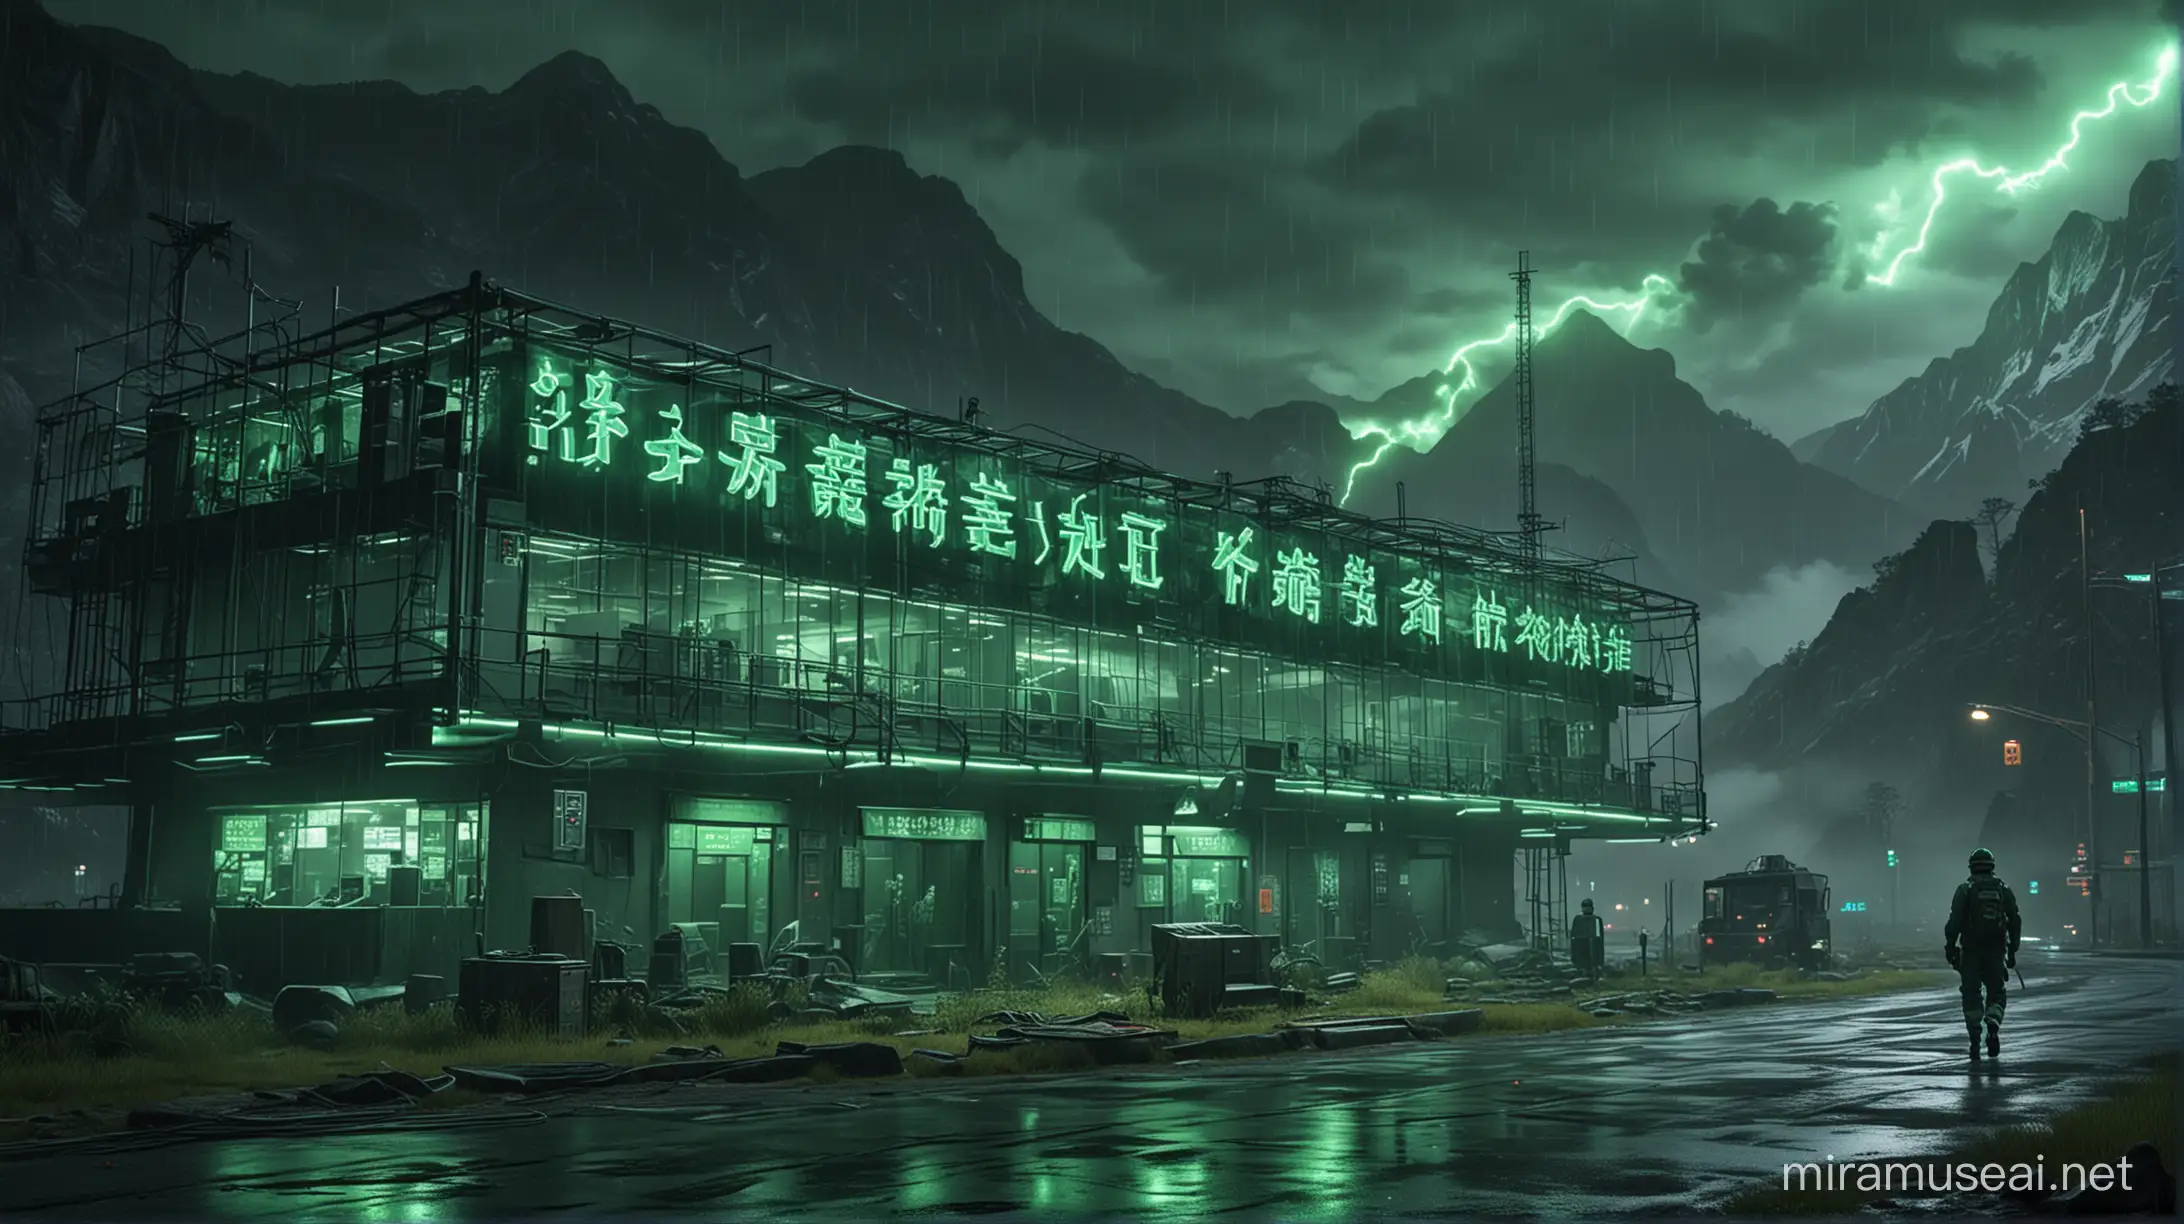 Futuristic Research Center Illuminated by Vibrant Green Neon Lights in Rainy Weather